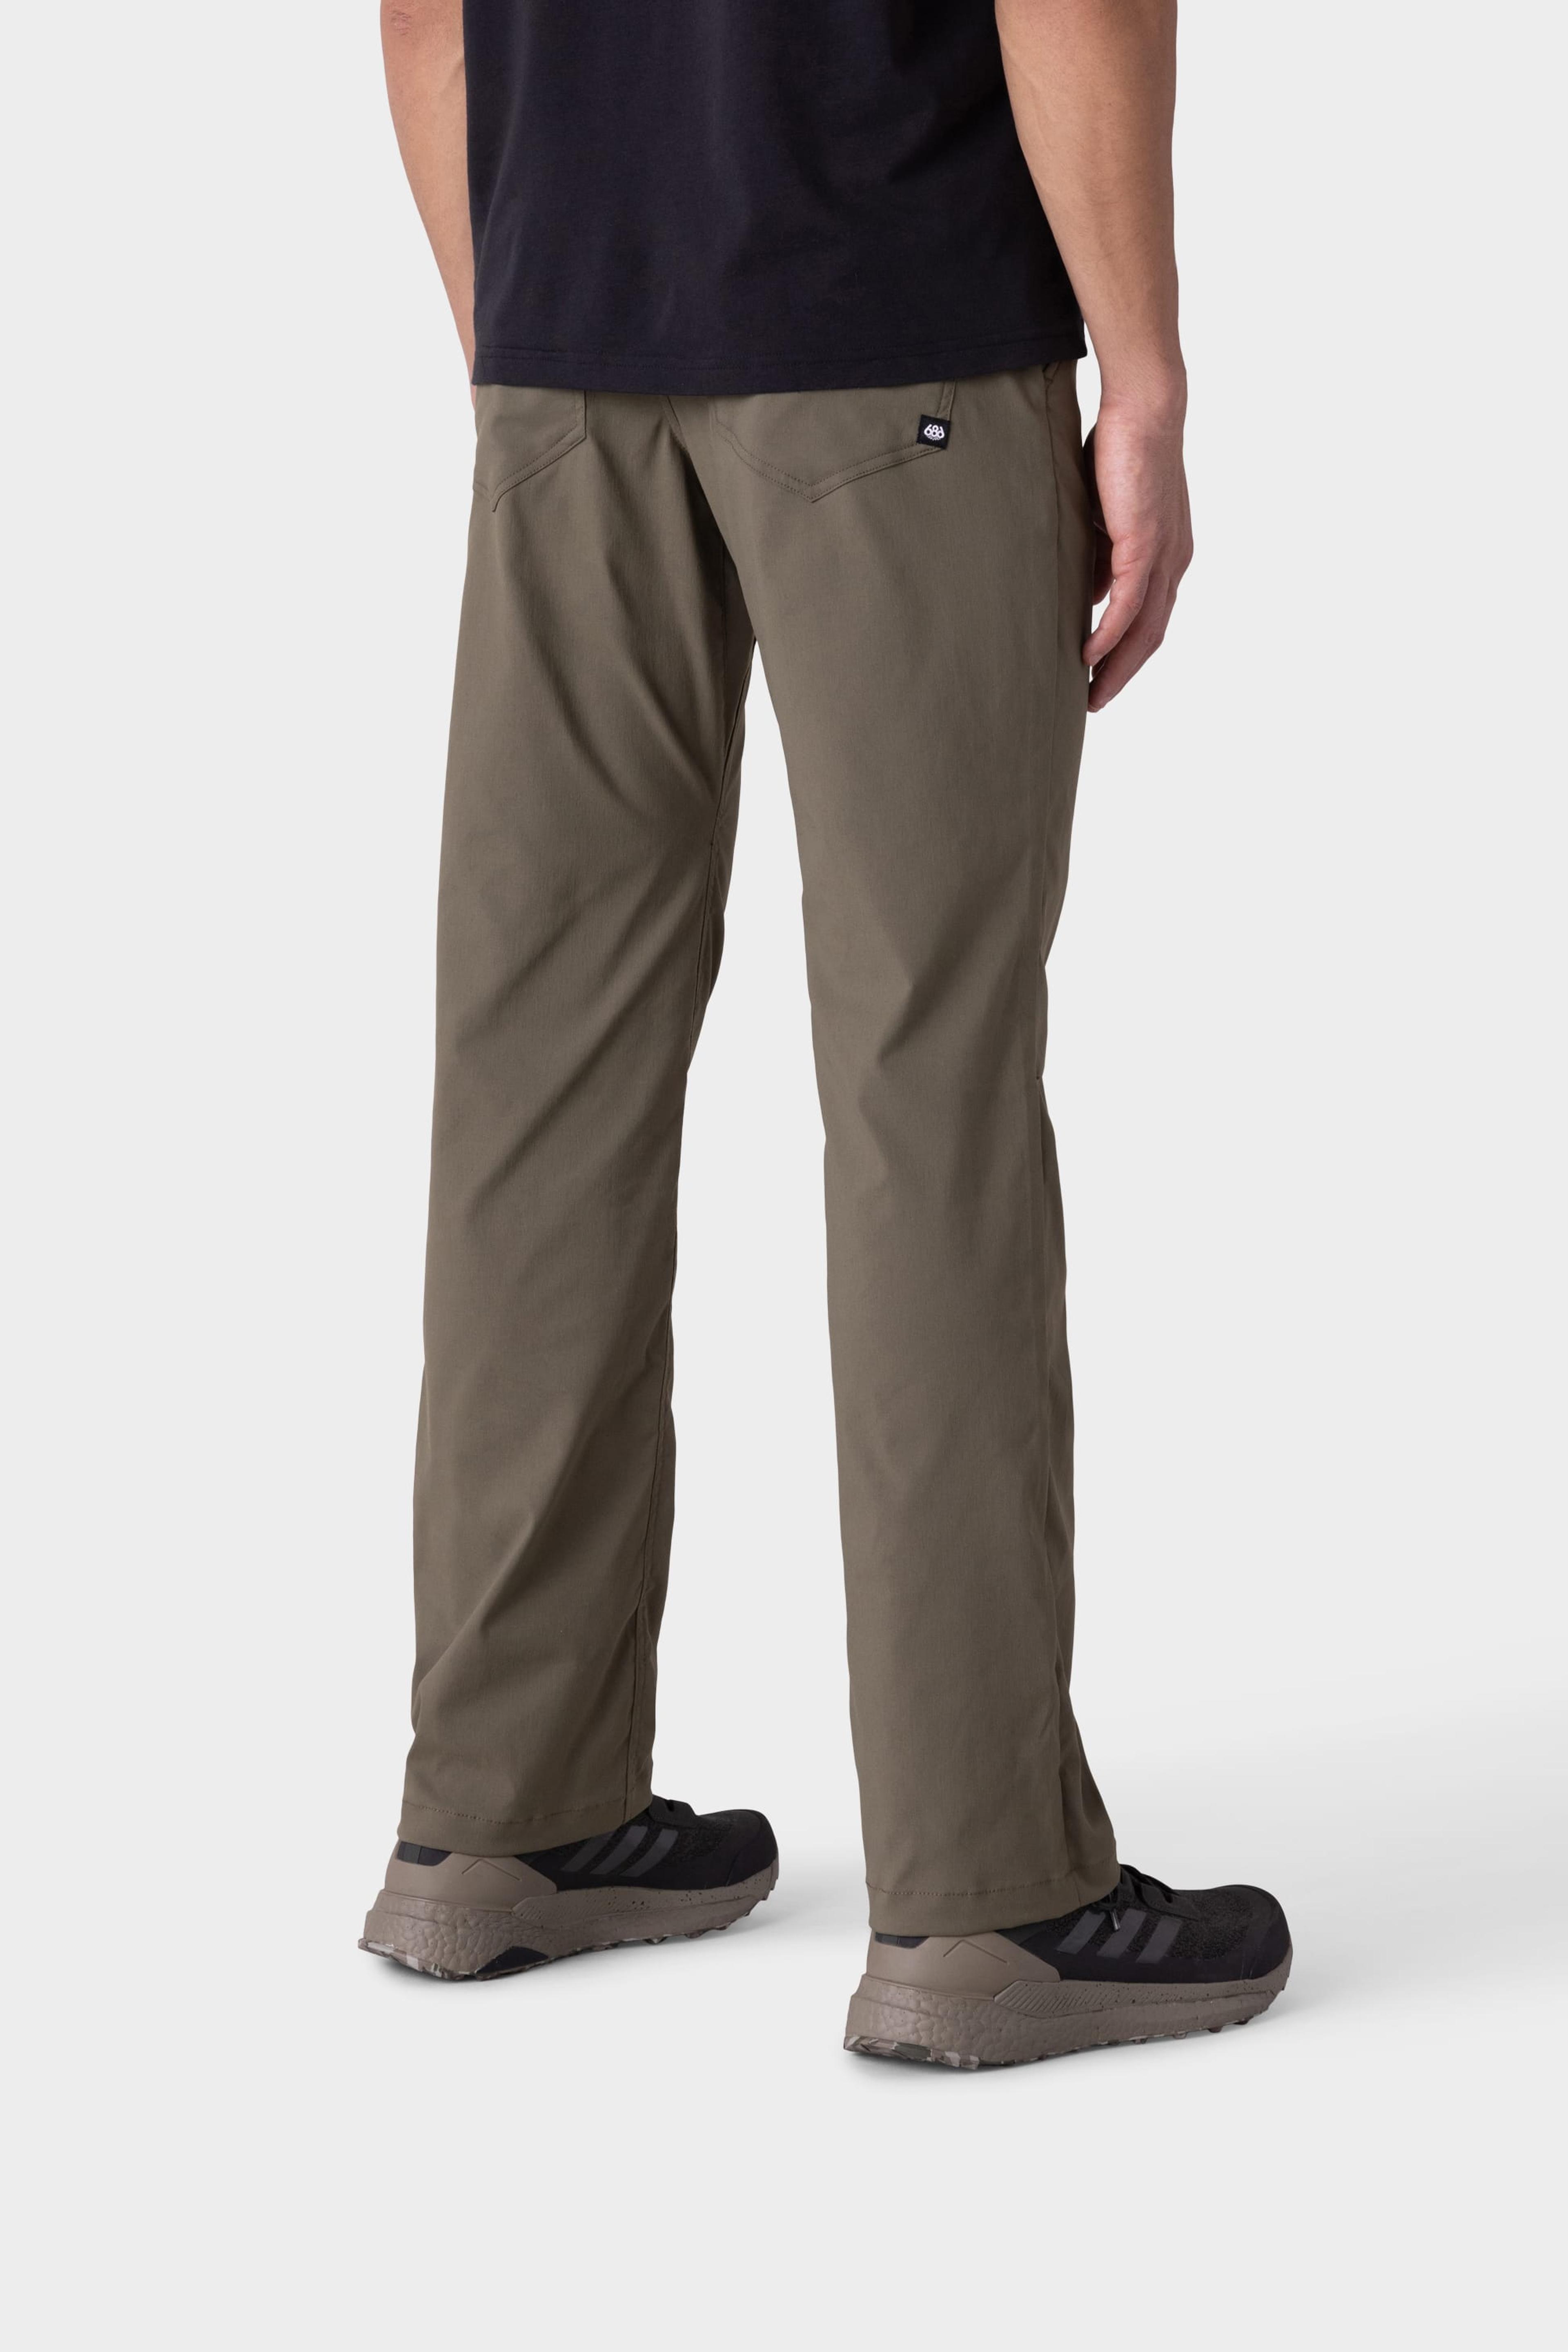 Alternate View 42 of 686 Men's Everywhere Pant - Relaxed Fit